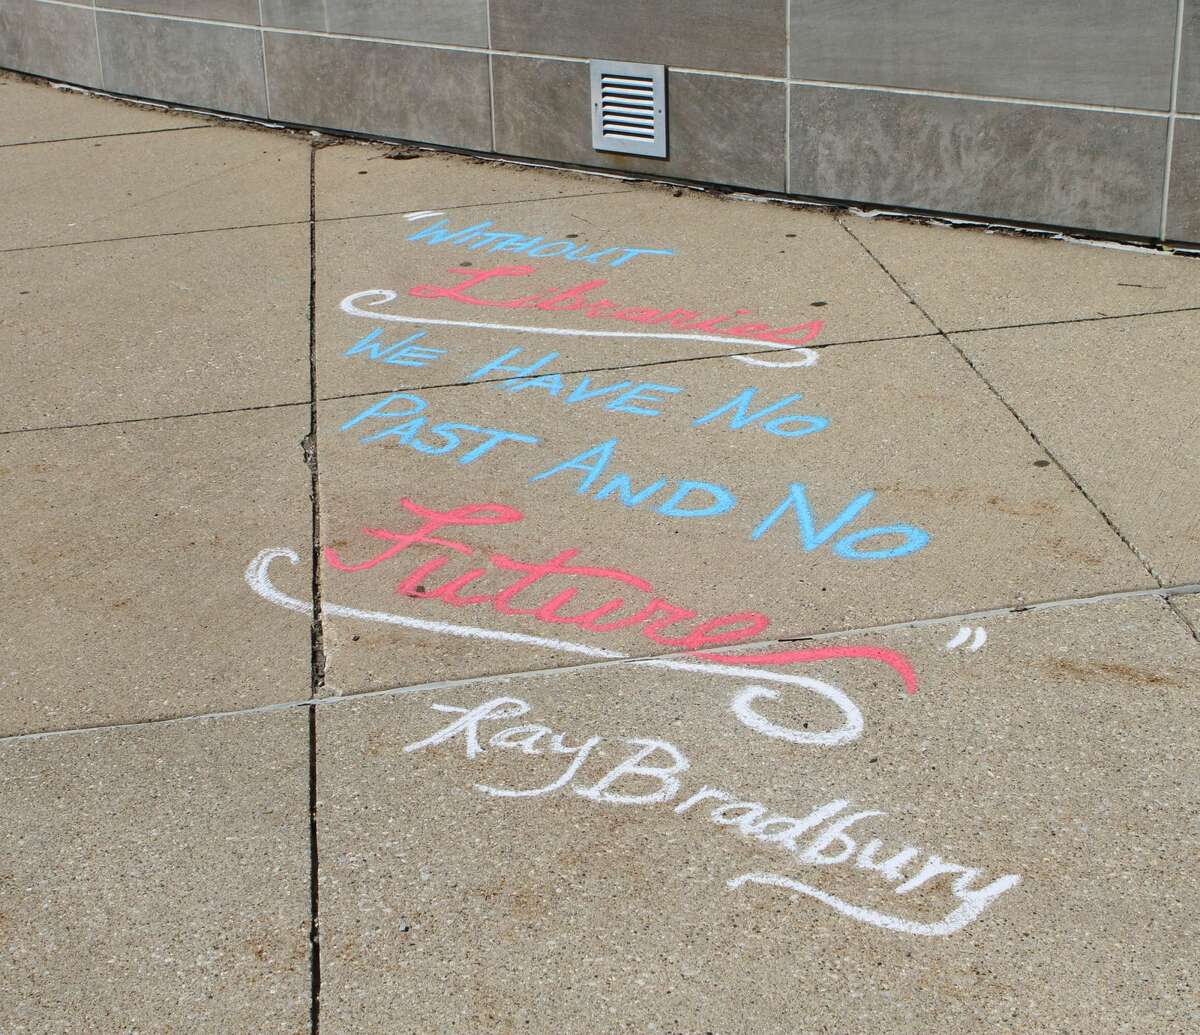 Members of the Ferris State University community covered the Big Rapids campus with messages of inclusion and welcome during the fourth annual Chalk the Walk event. Participants of the event were provided with a list of quotes and messages that aim to make all students feel like they have a place on campus. (Pioneer photos/Taylor Fussman)